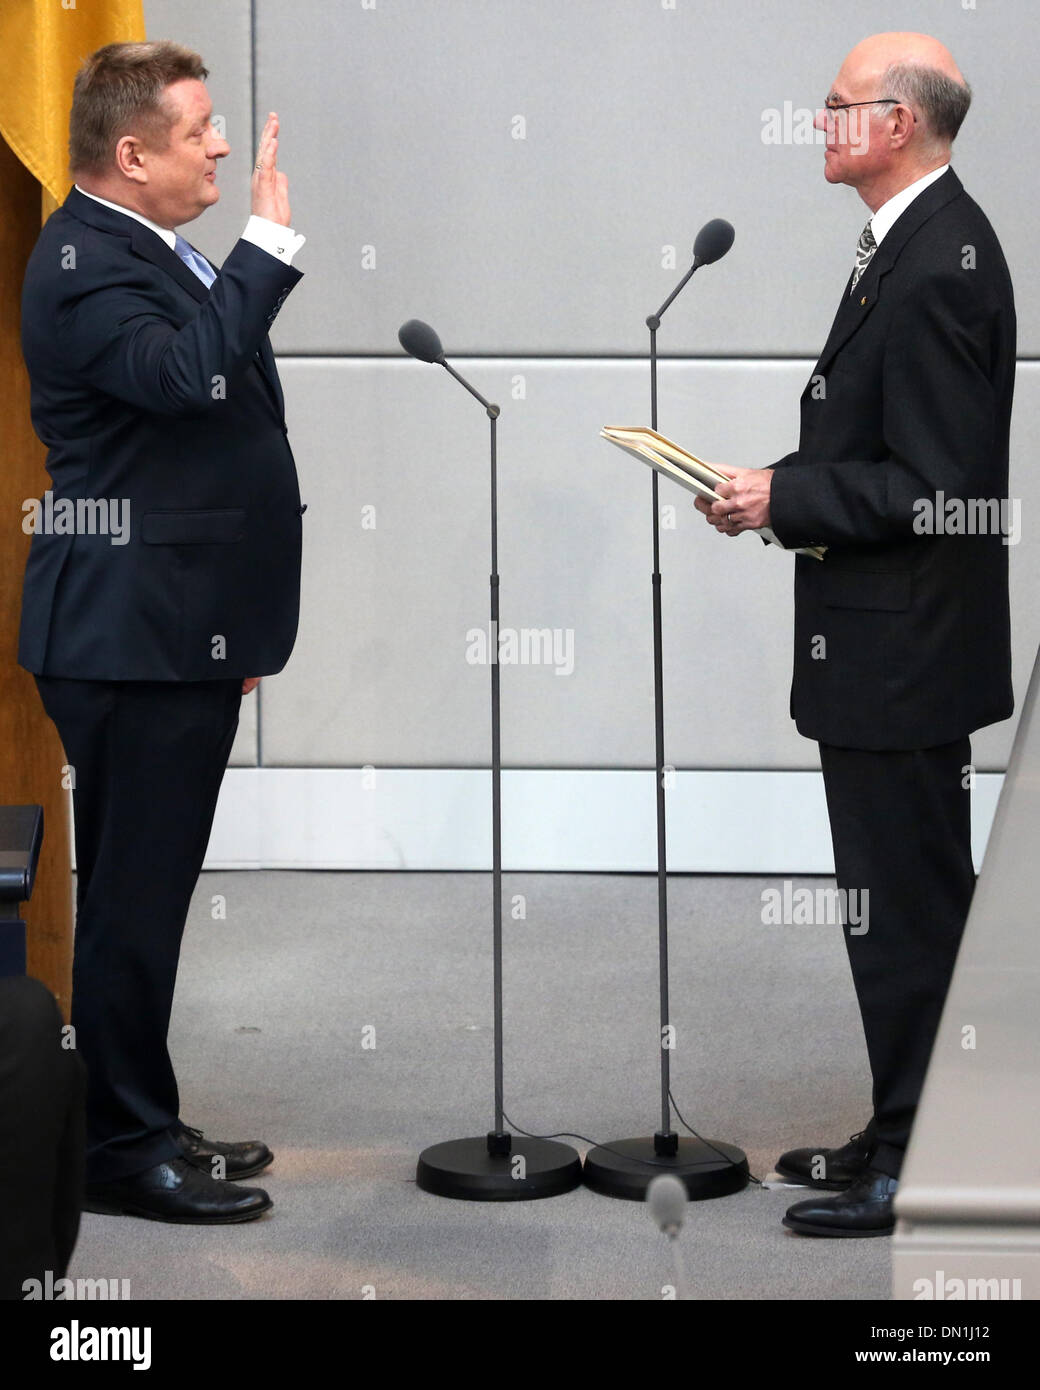 Berlin, Germany. 17th Dec, 2013. German Health Minister Hermann Groehe is sworn in by President of the 'Bundestag' lower house of the German Parliament Norbert Lammert (CDU) at Bundestag in Berlin, Germany, 17 December 2013. Merkel was elected to a third term as German Chancellor. Photo: HANNIBAL/dpa/Alamy Live News Stock Photo